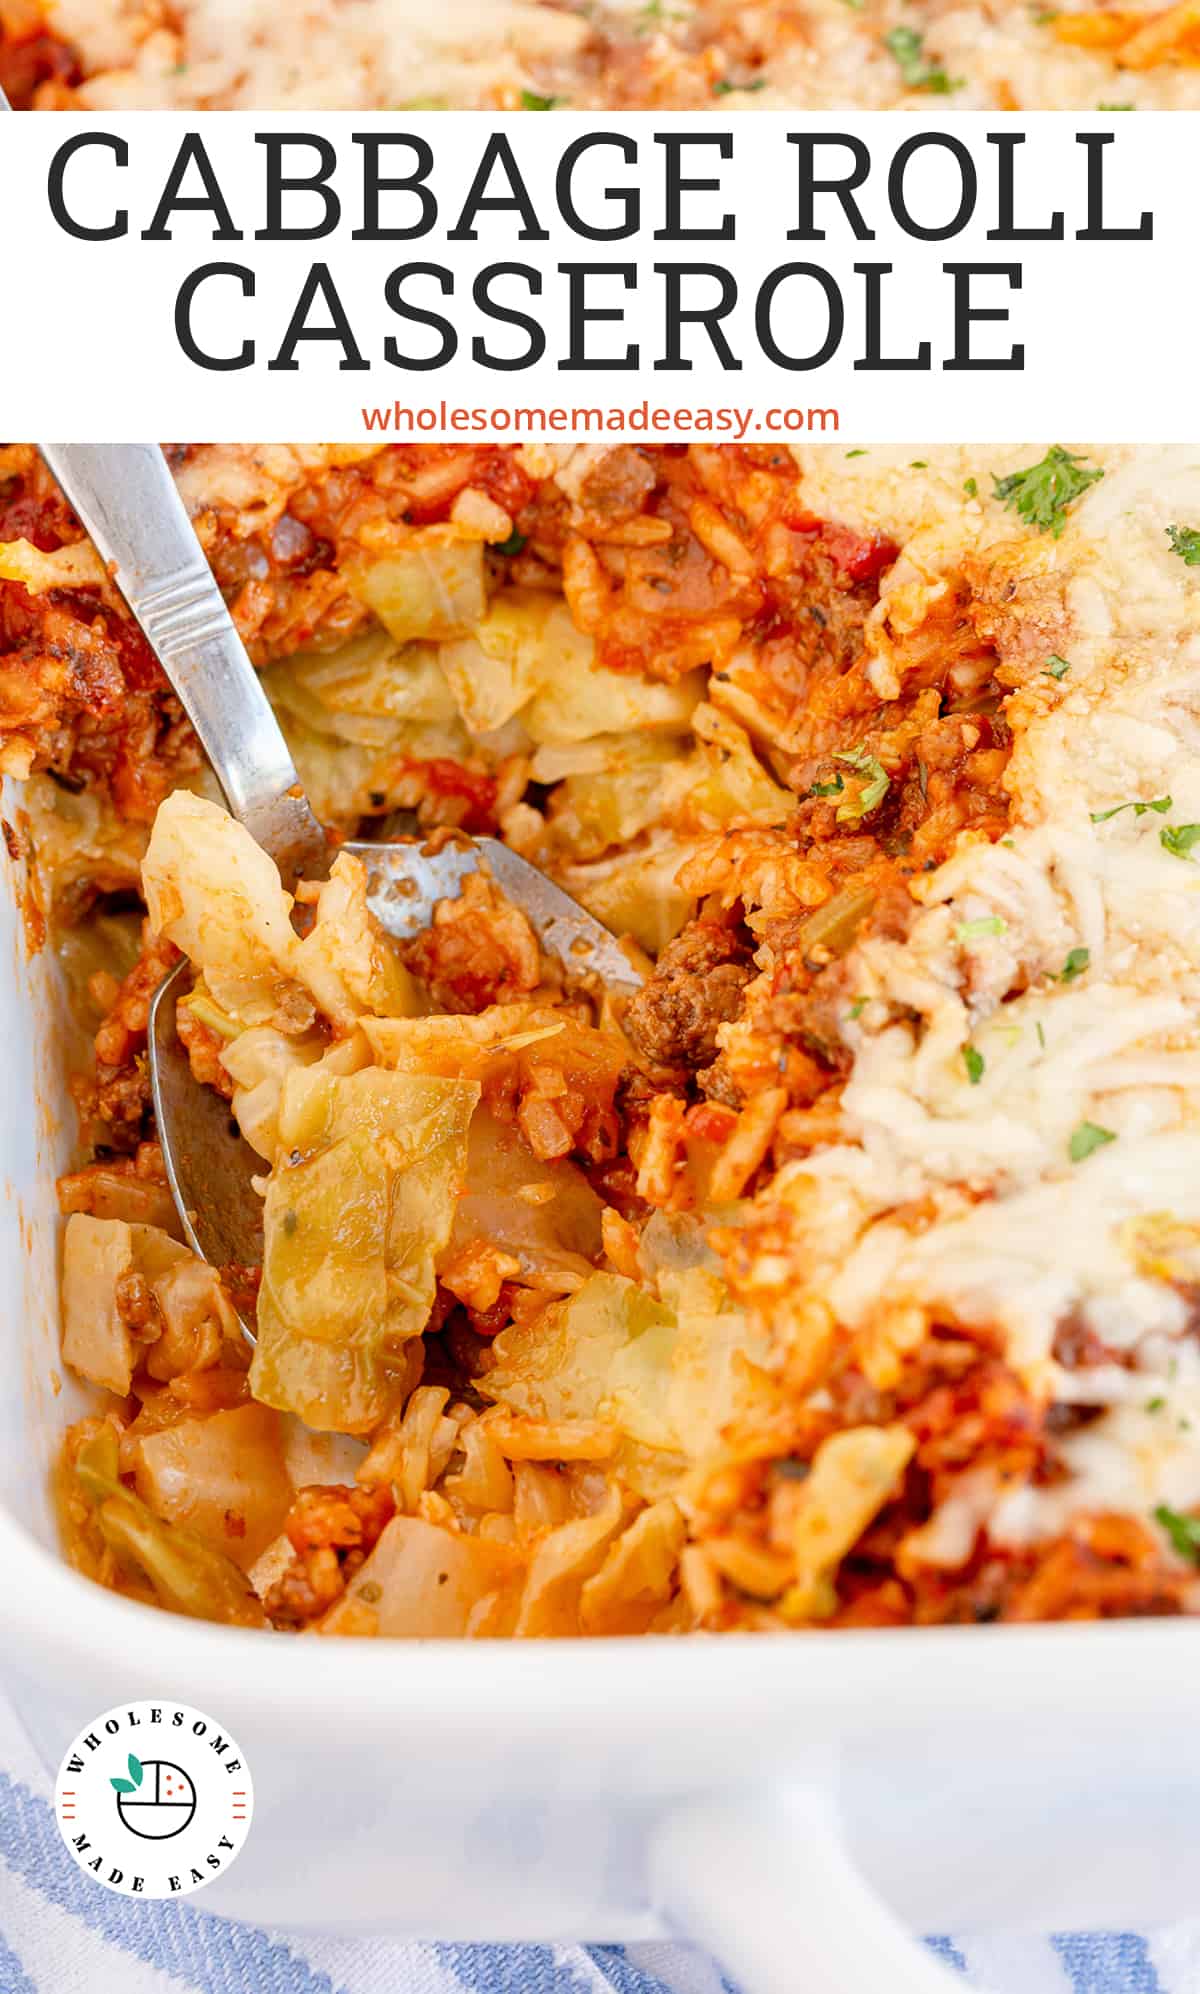 A spoon digs into a casserole with cabbage with text overlay.